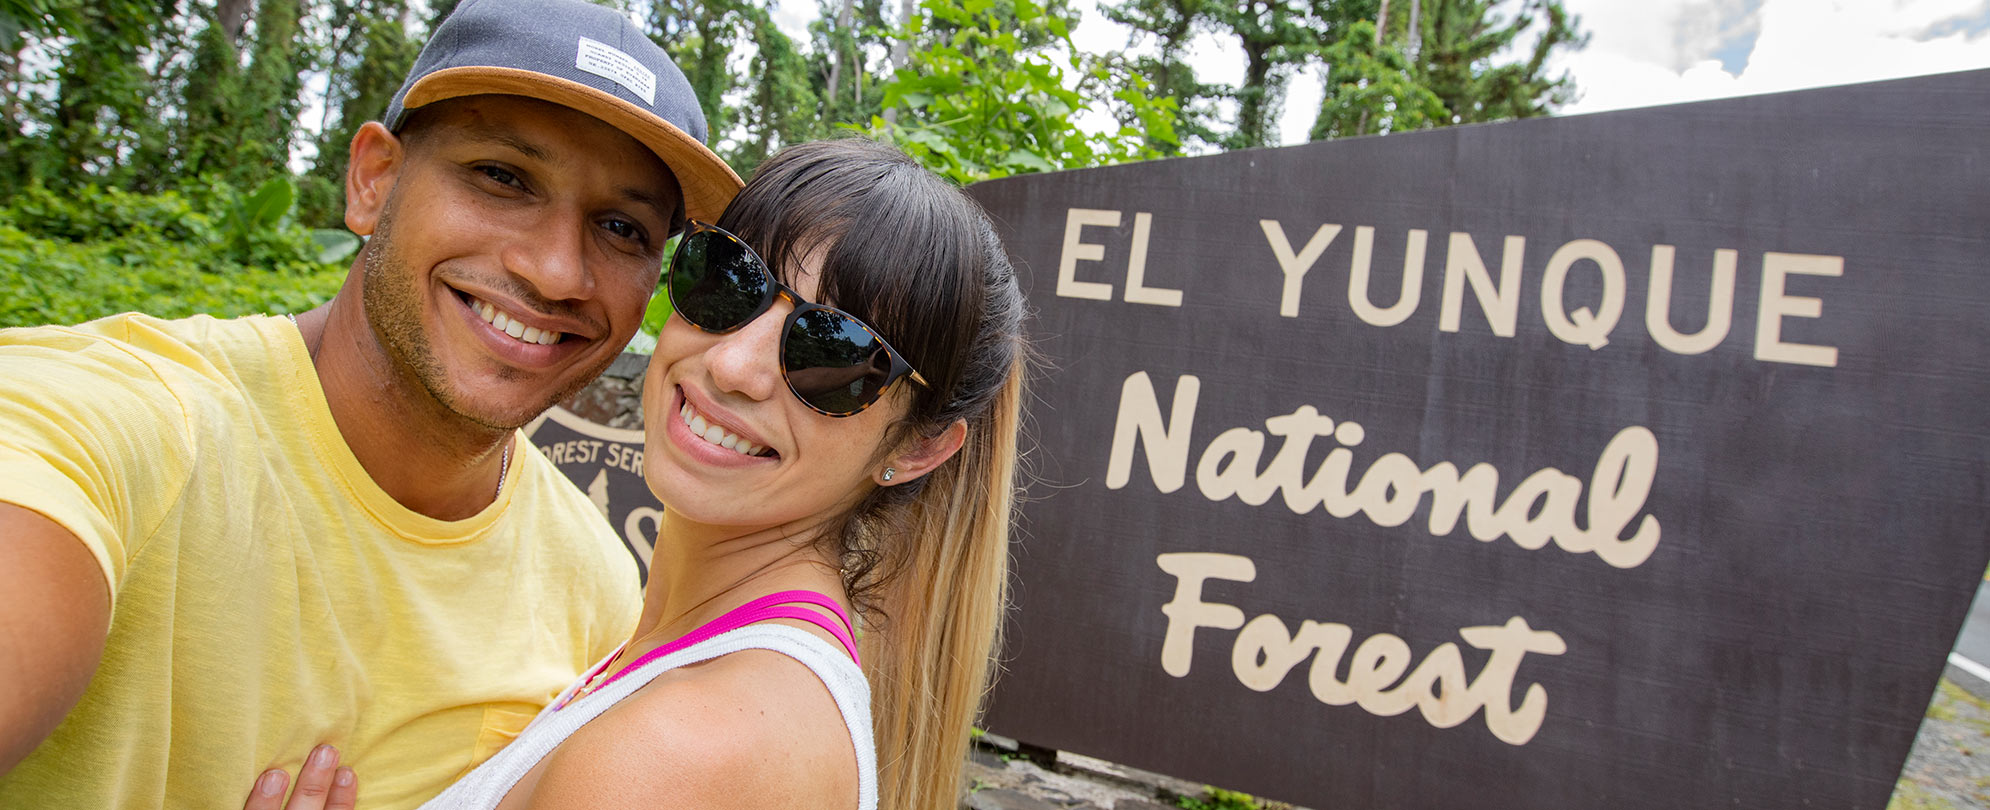 Man in hat and woman in sunglasses pose for a selfie in front of the El Yunque National Forest in Rio Grande, Puerto Rico.